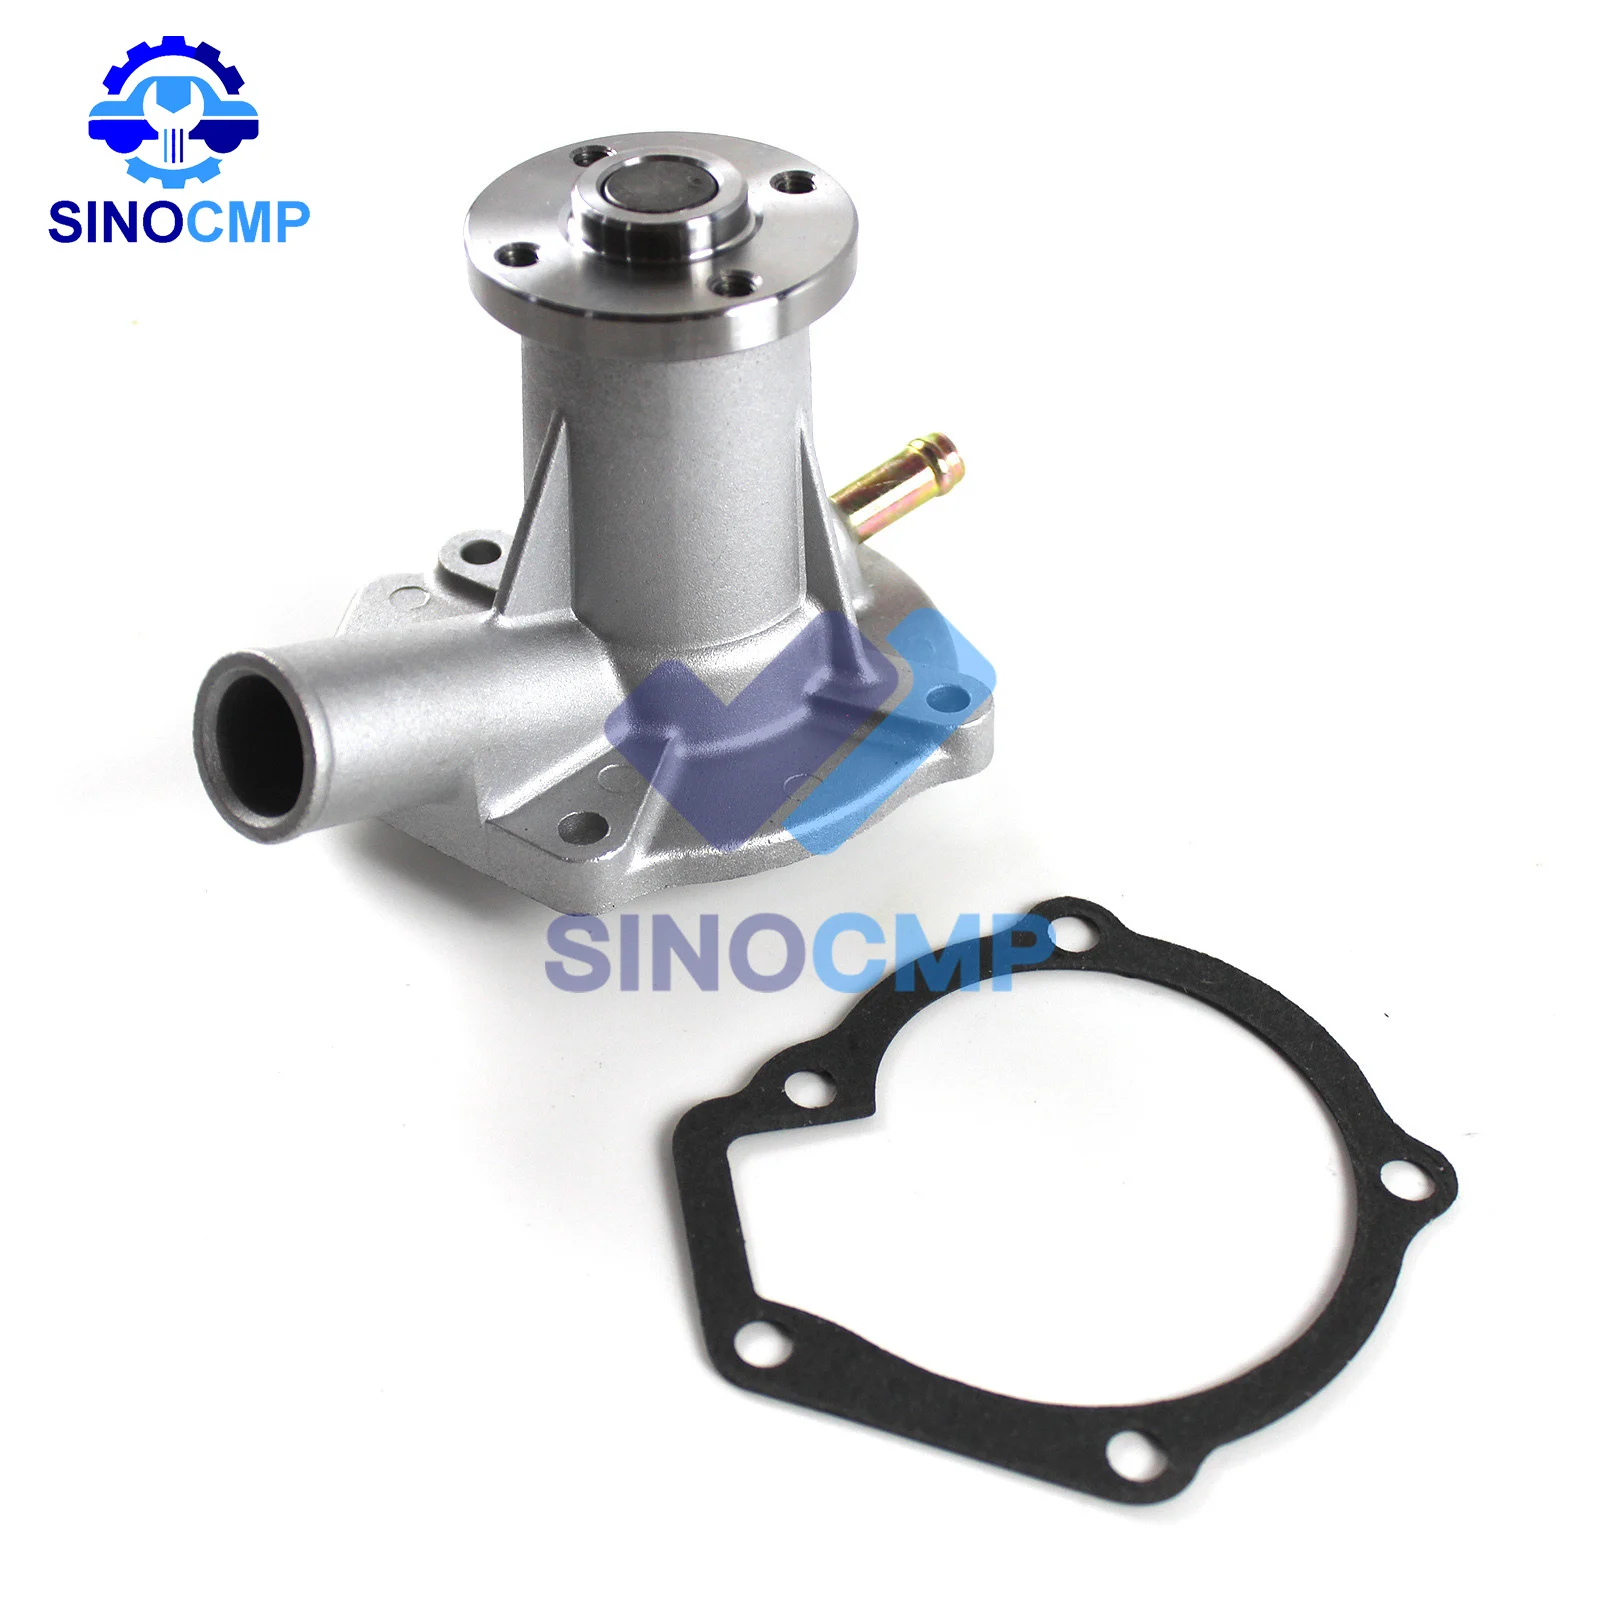 

15534-73030 1553473030 Water Pump for Kubota D950 D850 D750 B5200 B6200 B7200 B8200 B7100 B1550 B1750 B5200D Compact Tractor